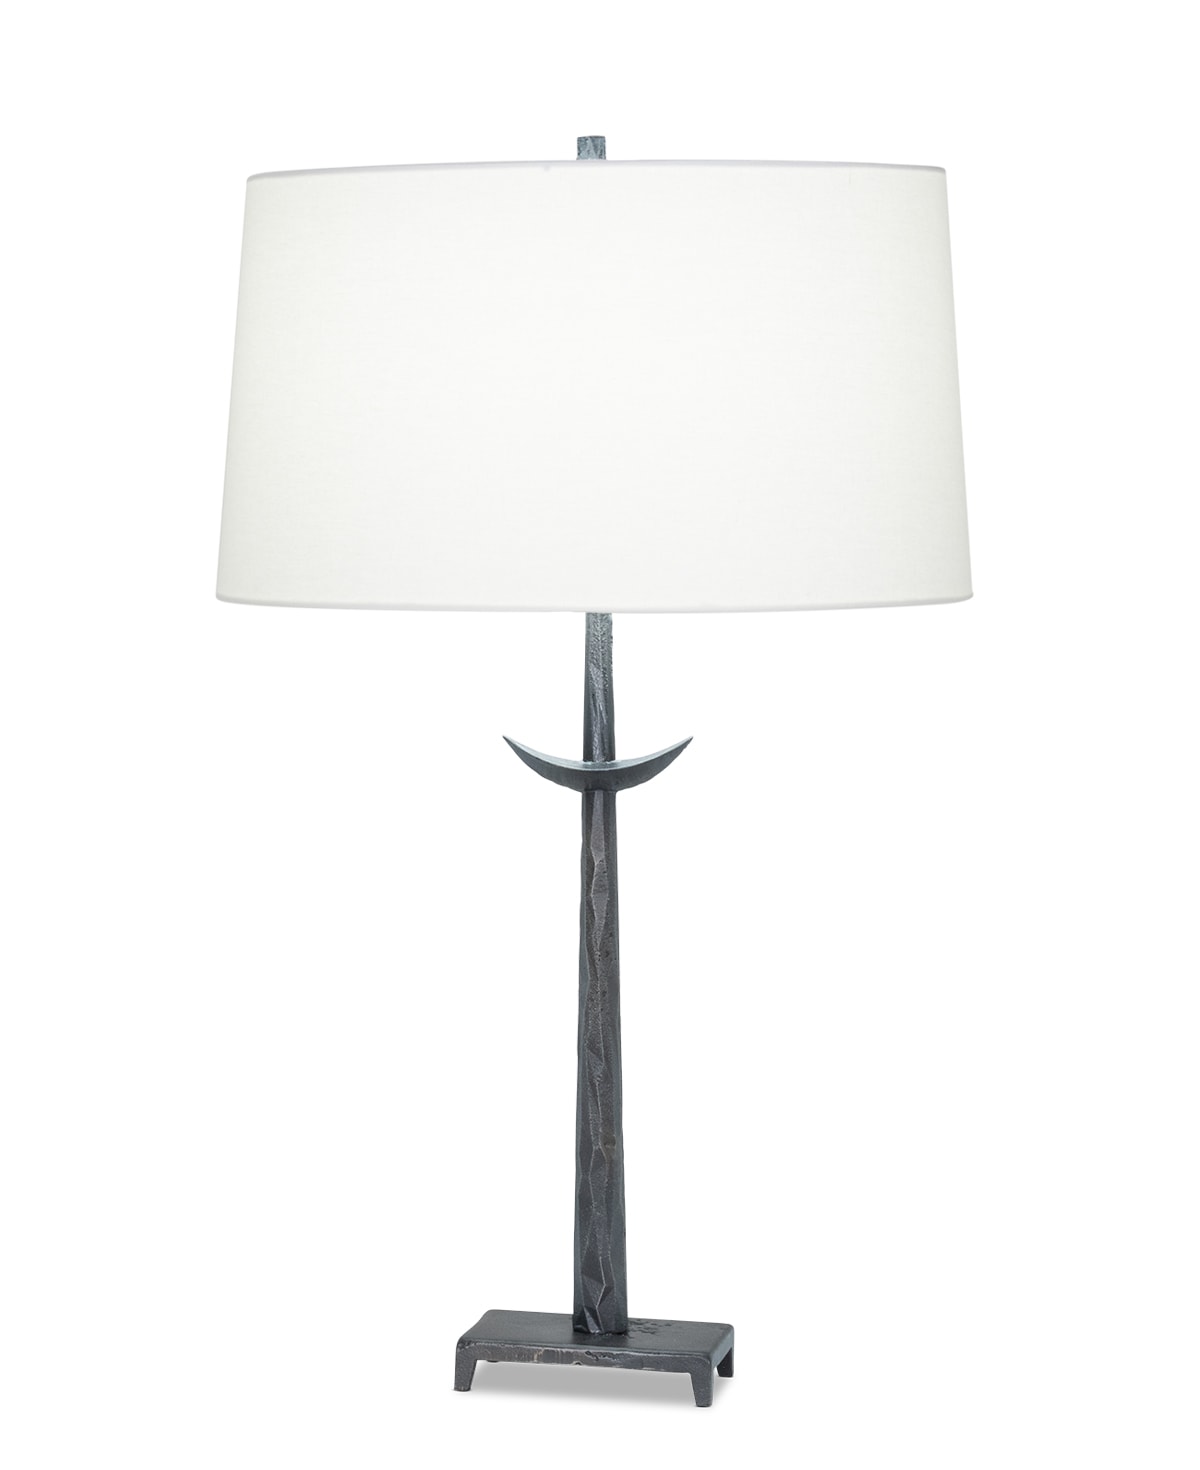 FlowDecor Roman Table Lamp in metal with antique black finish and off-white linen oval shade (# 4497)